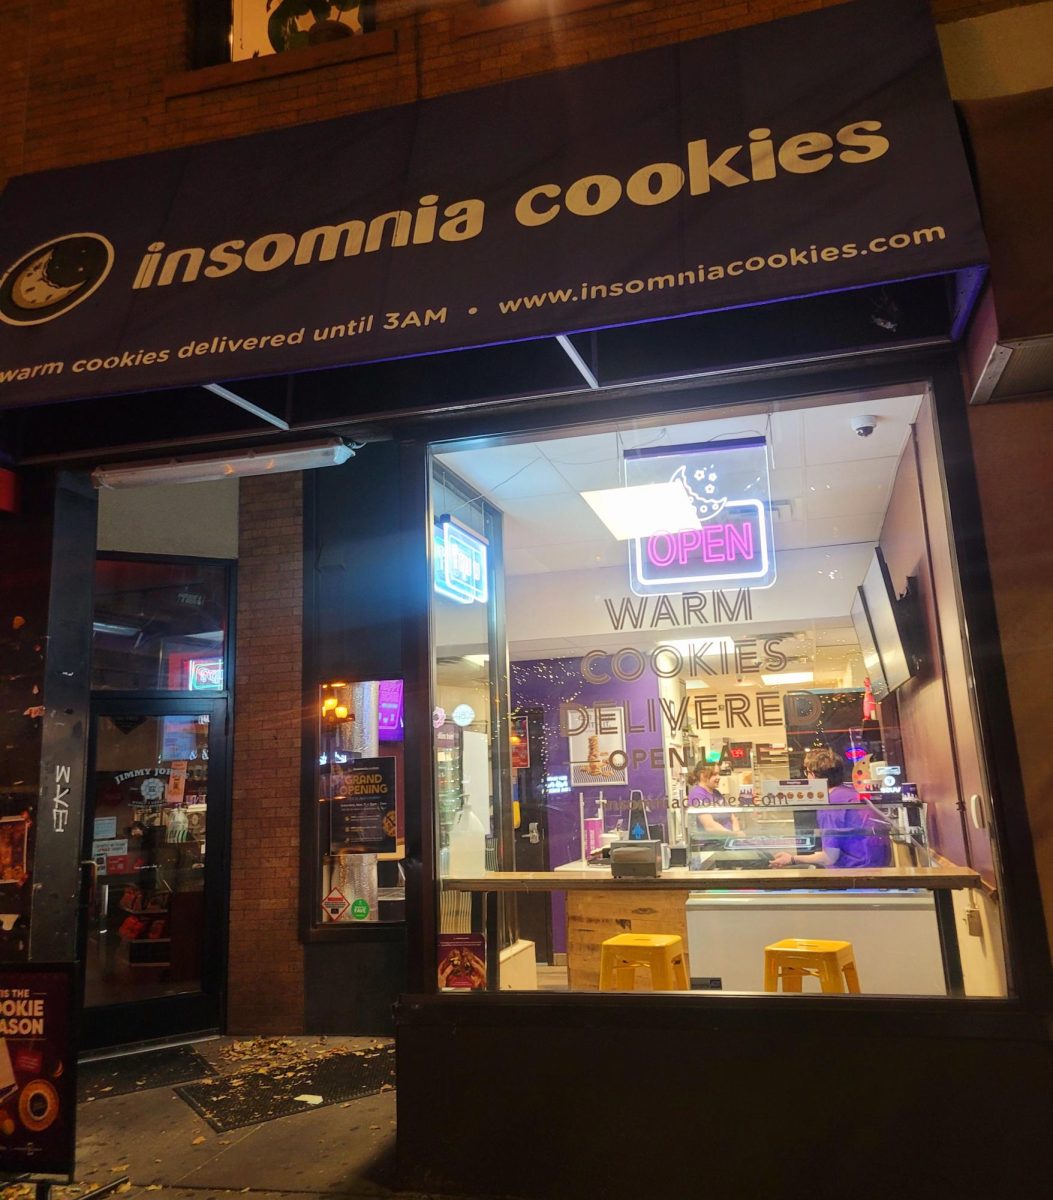 Insomnia Cookies late at night